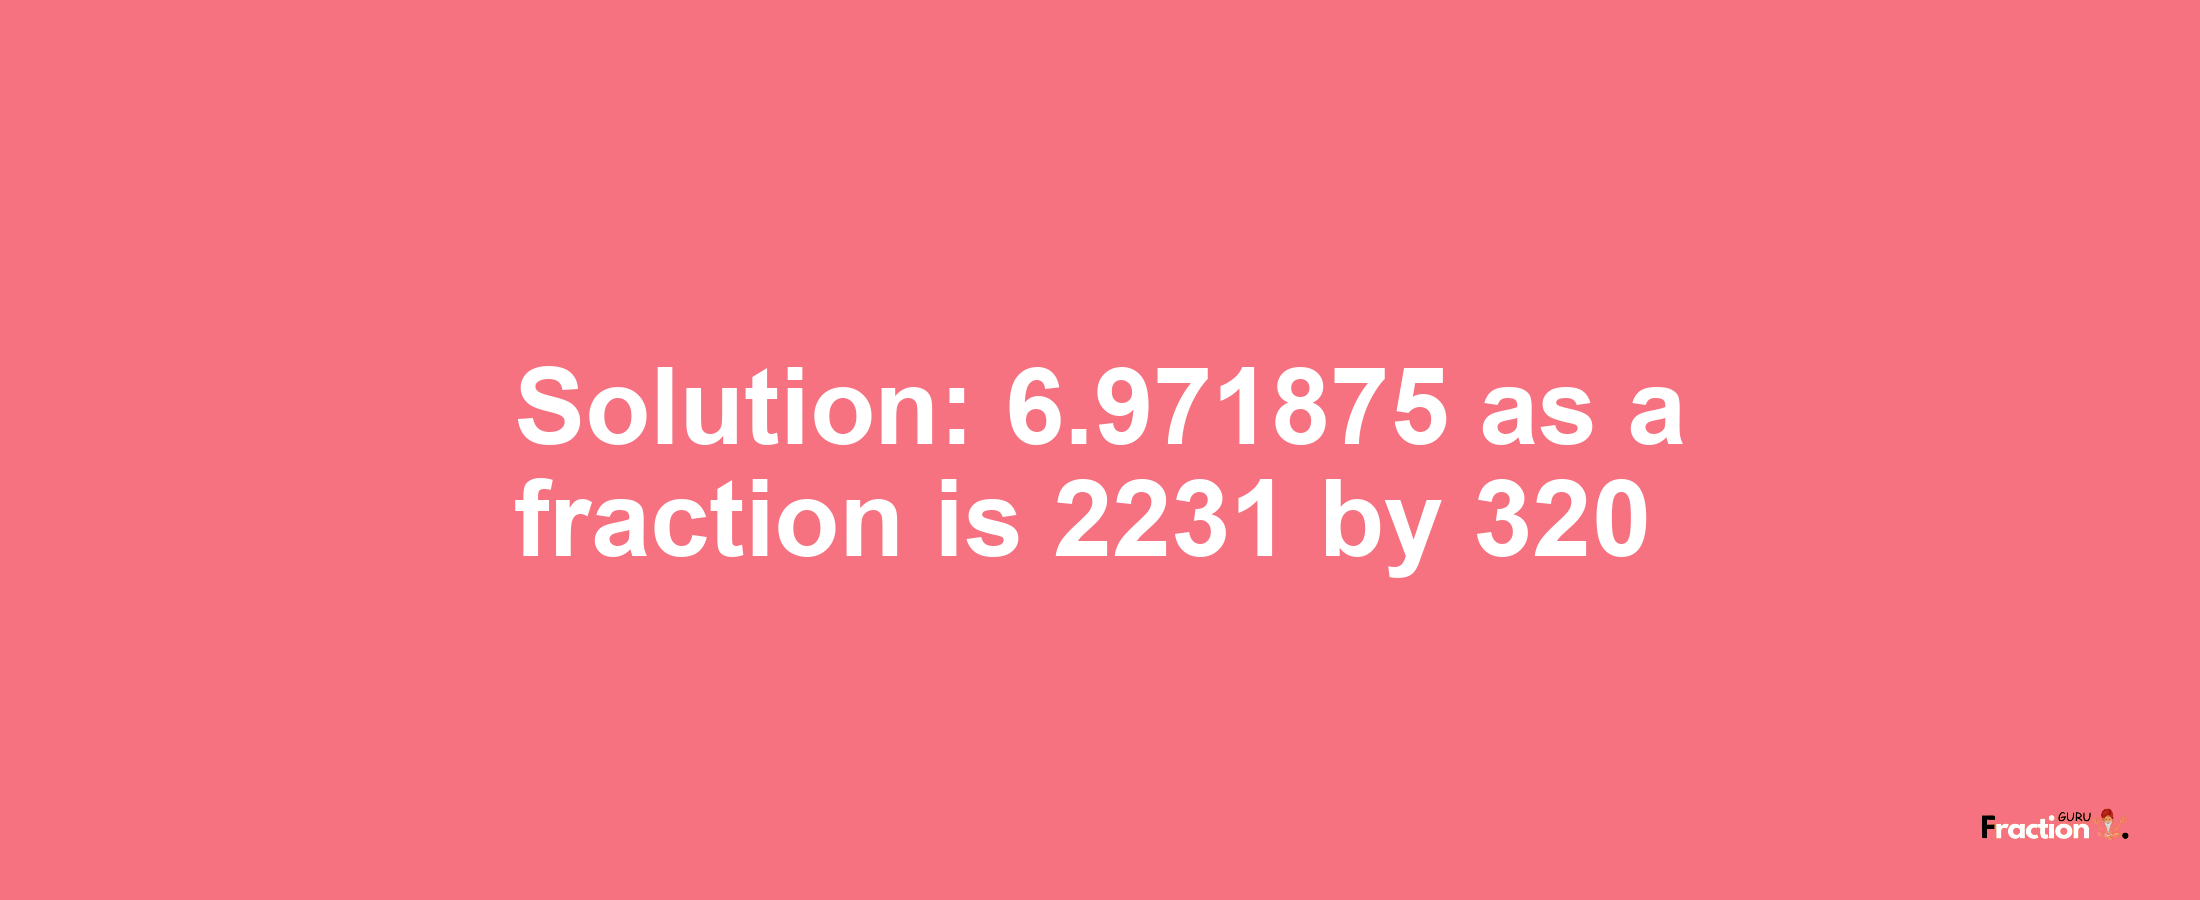 Solution:6.971875 as a fraction is 2231/320